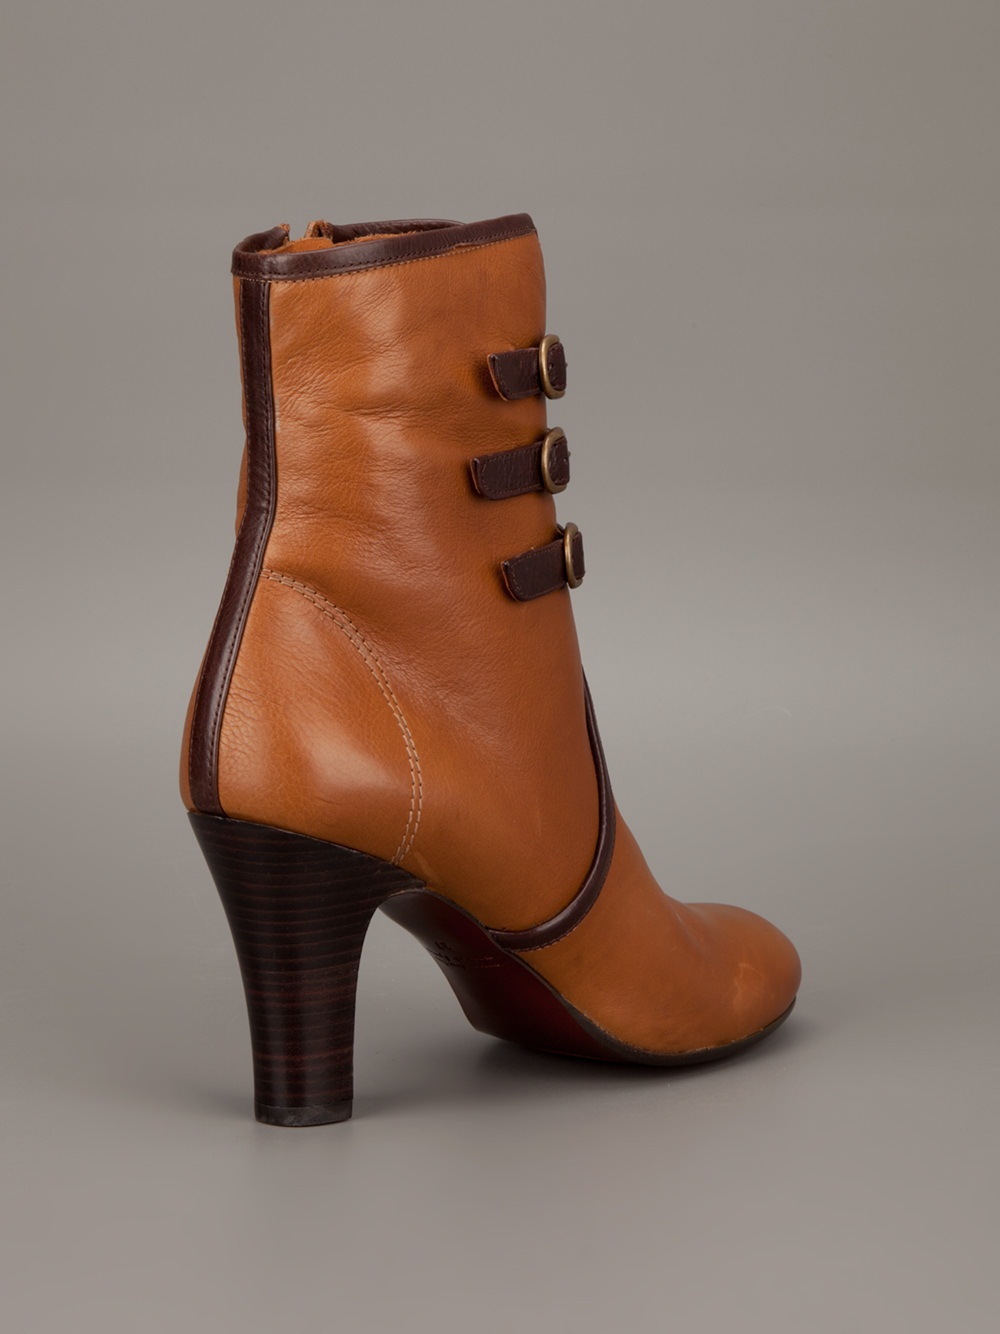 Lyst - Chie mihara Quoria Boot in Brown